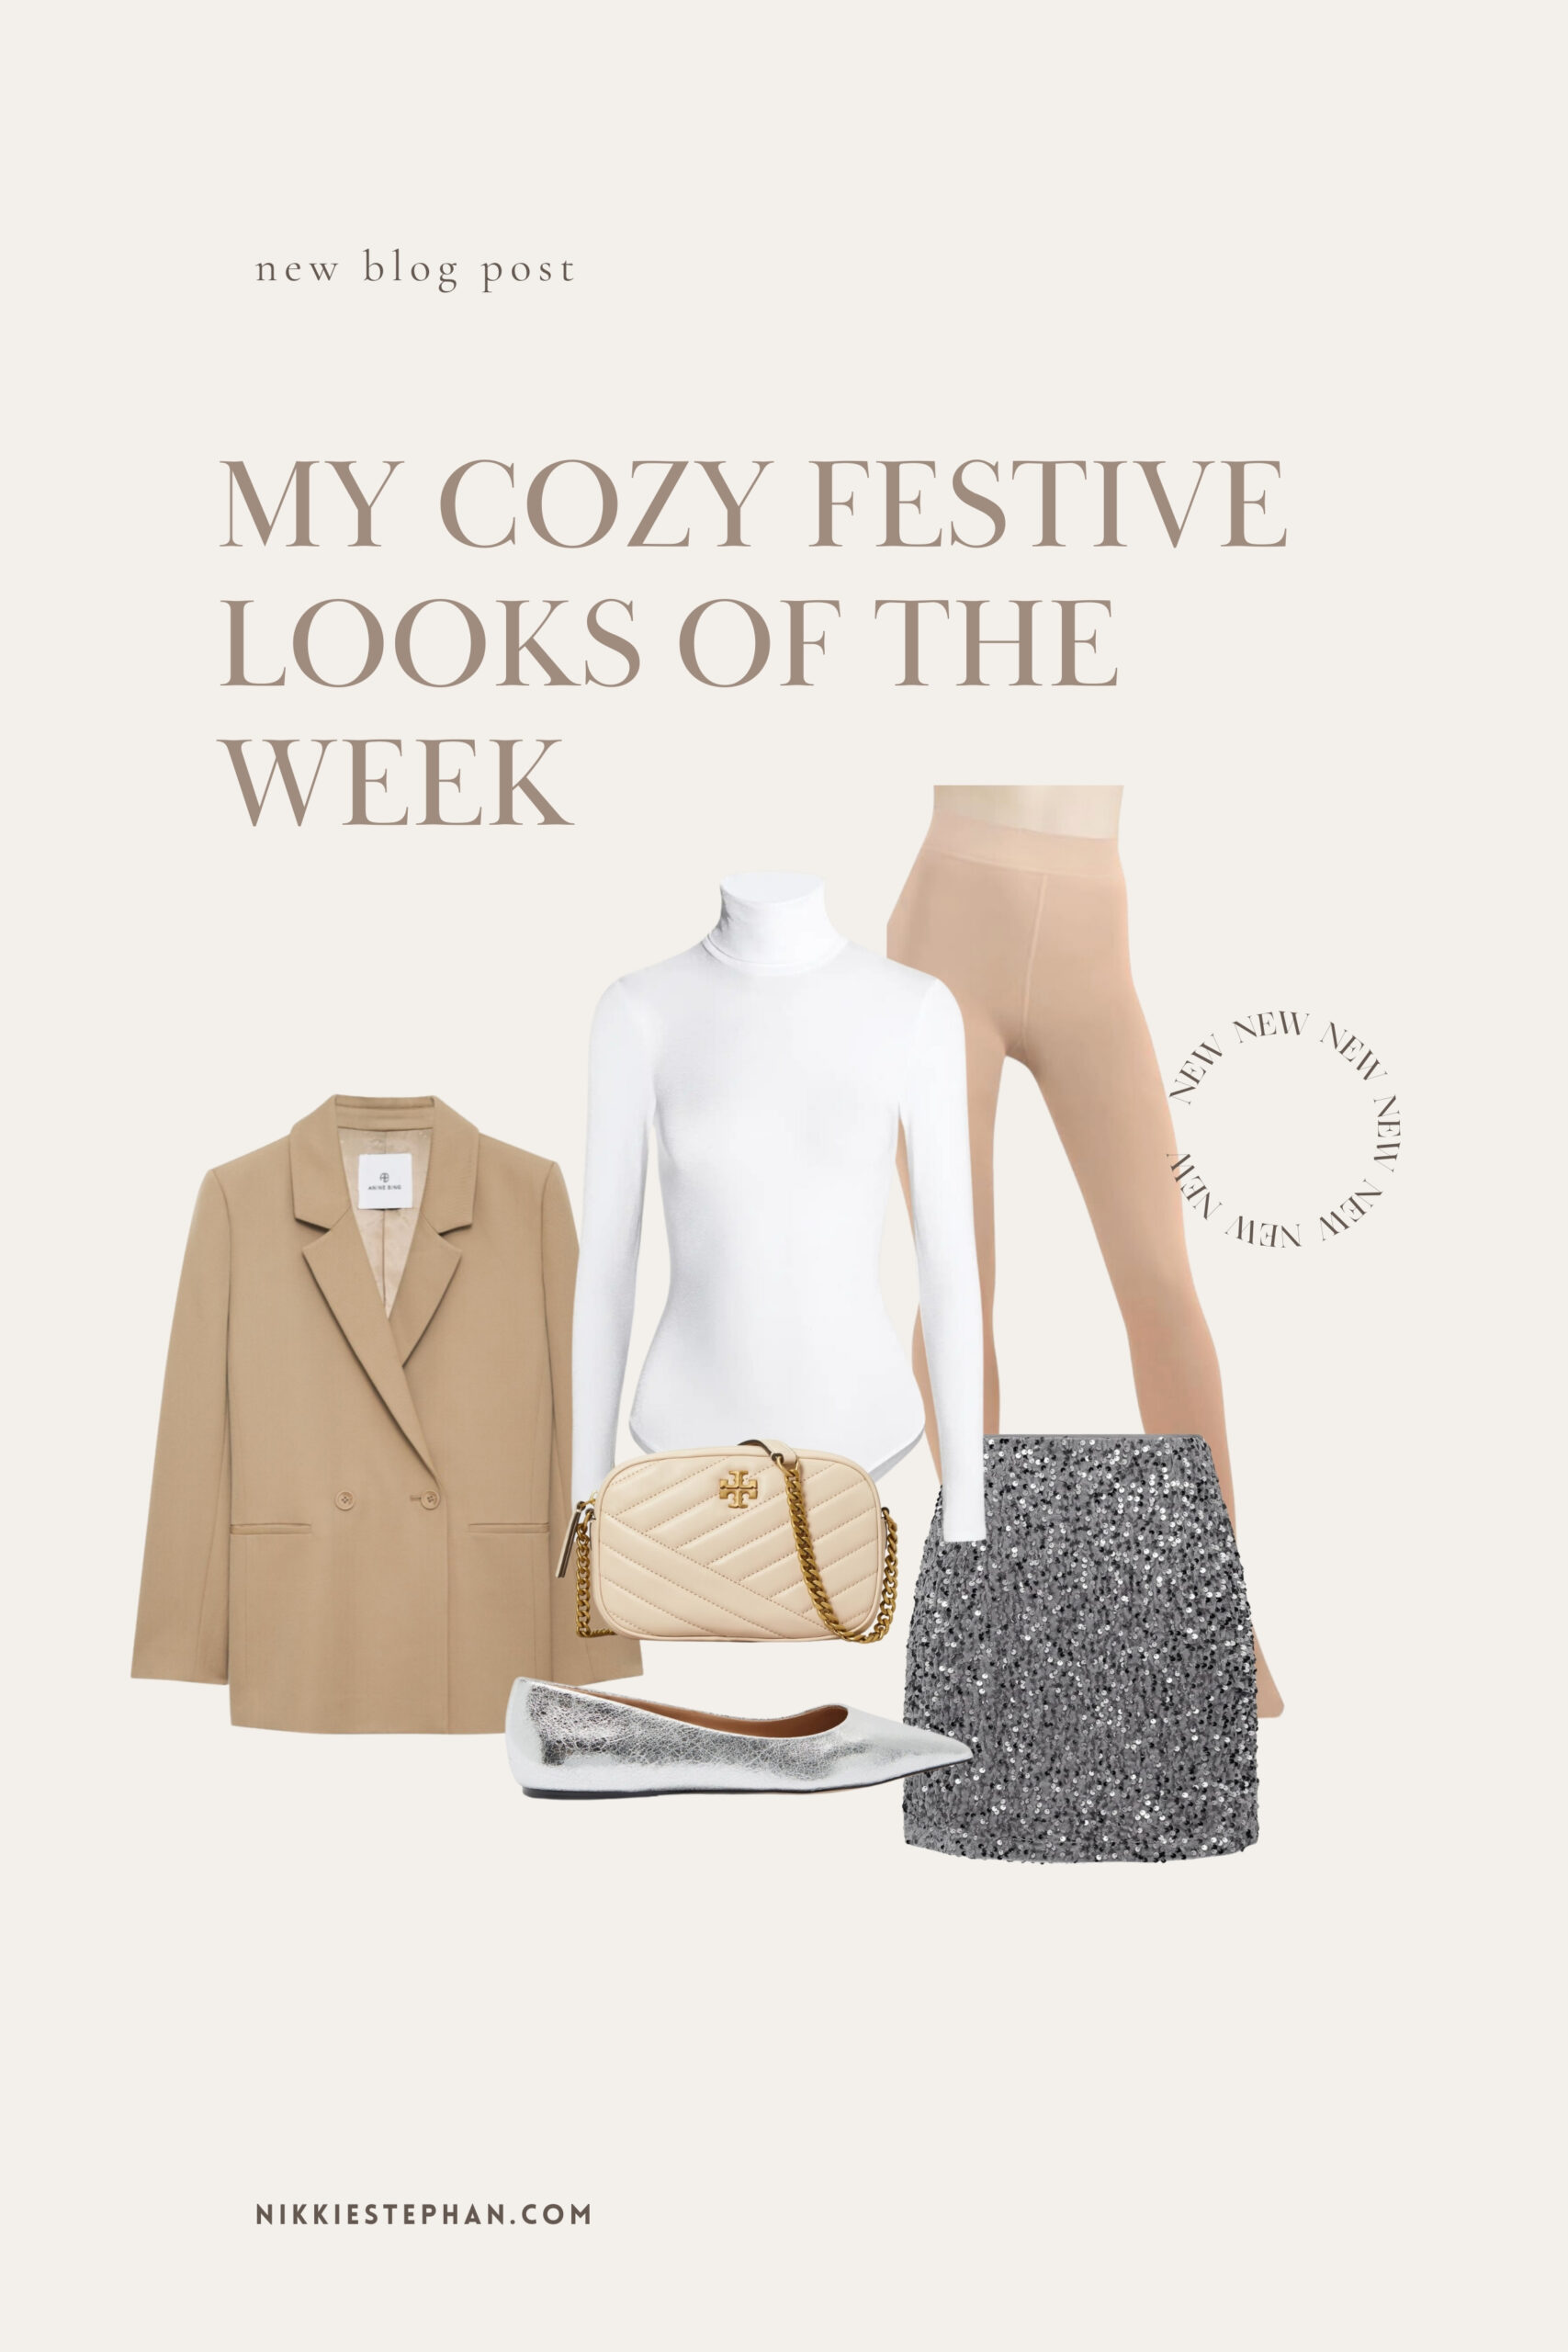 2 FESTIVE HOLIDAY OUTFITS FOR WOMEN